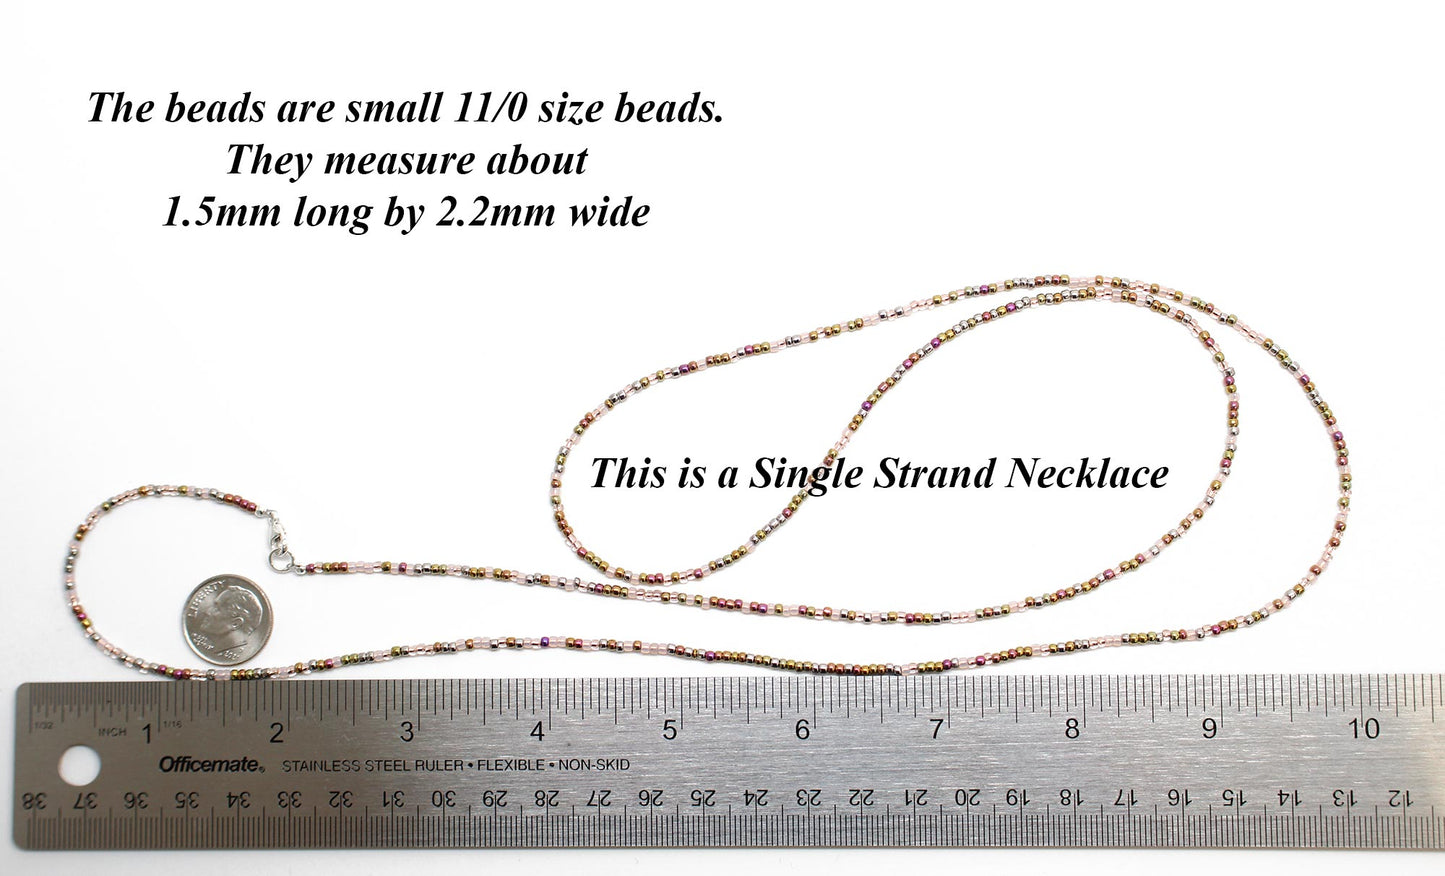 Hot Pink Seed Bead Necklace, Thin 1.5mm Single Strand Beaded Necklace 30